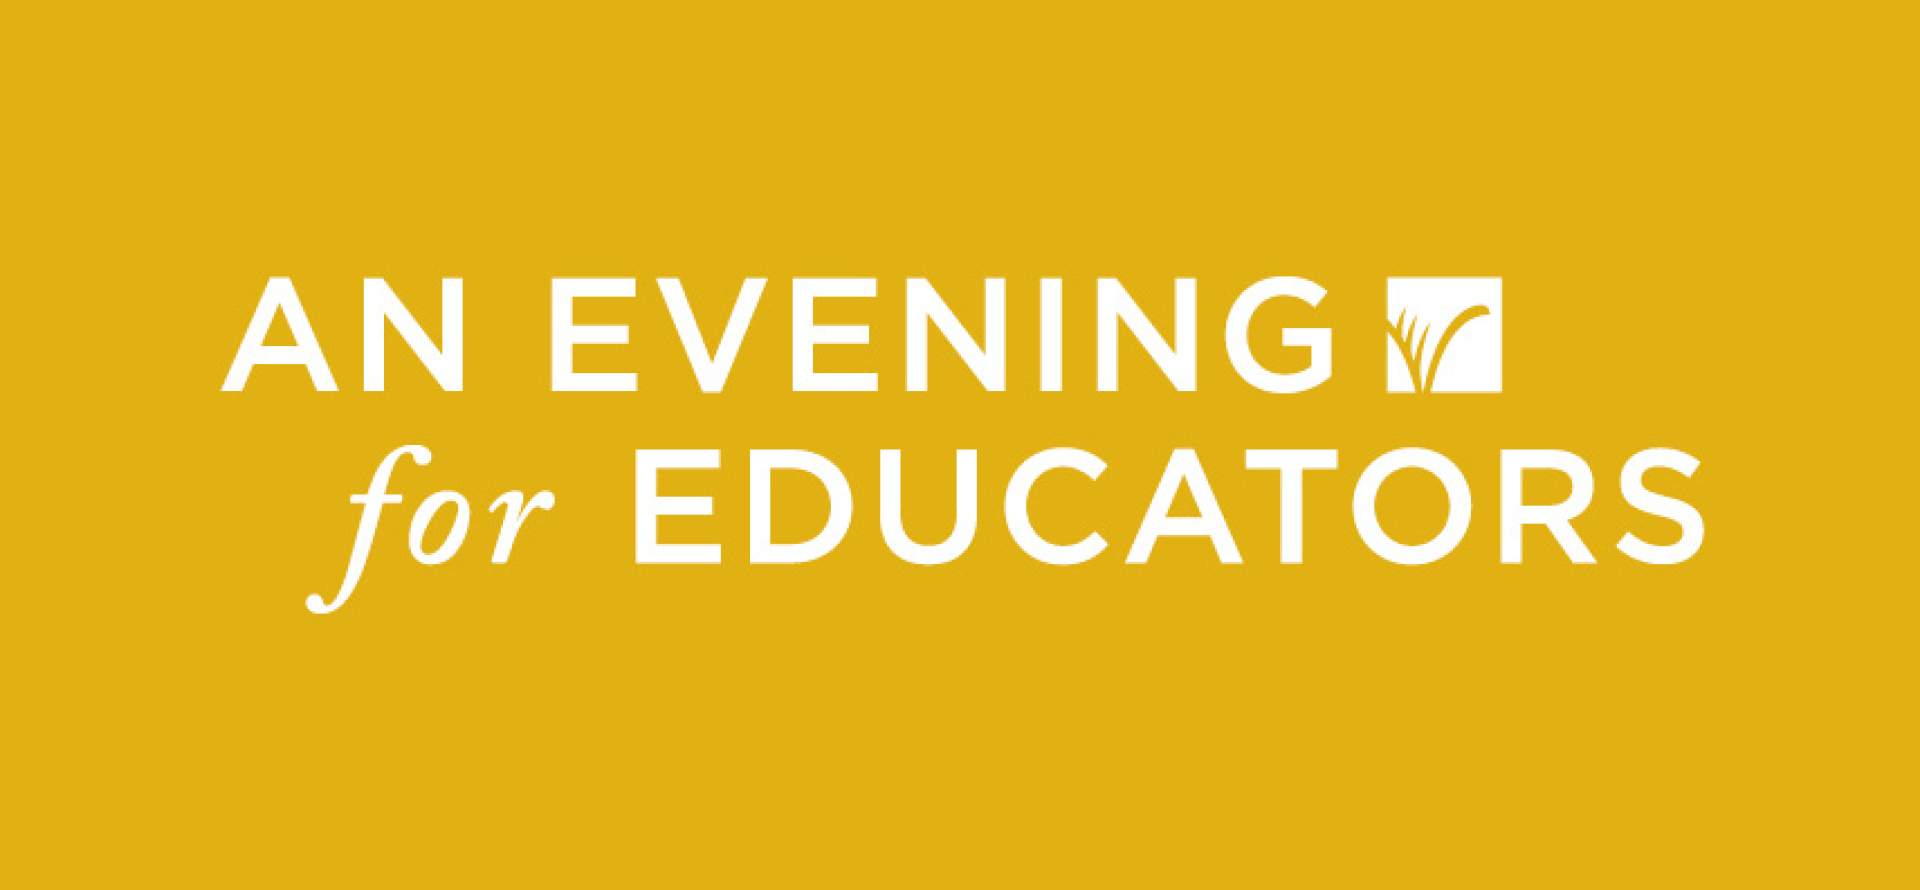 An Evening for Educators